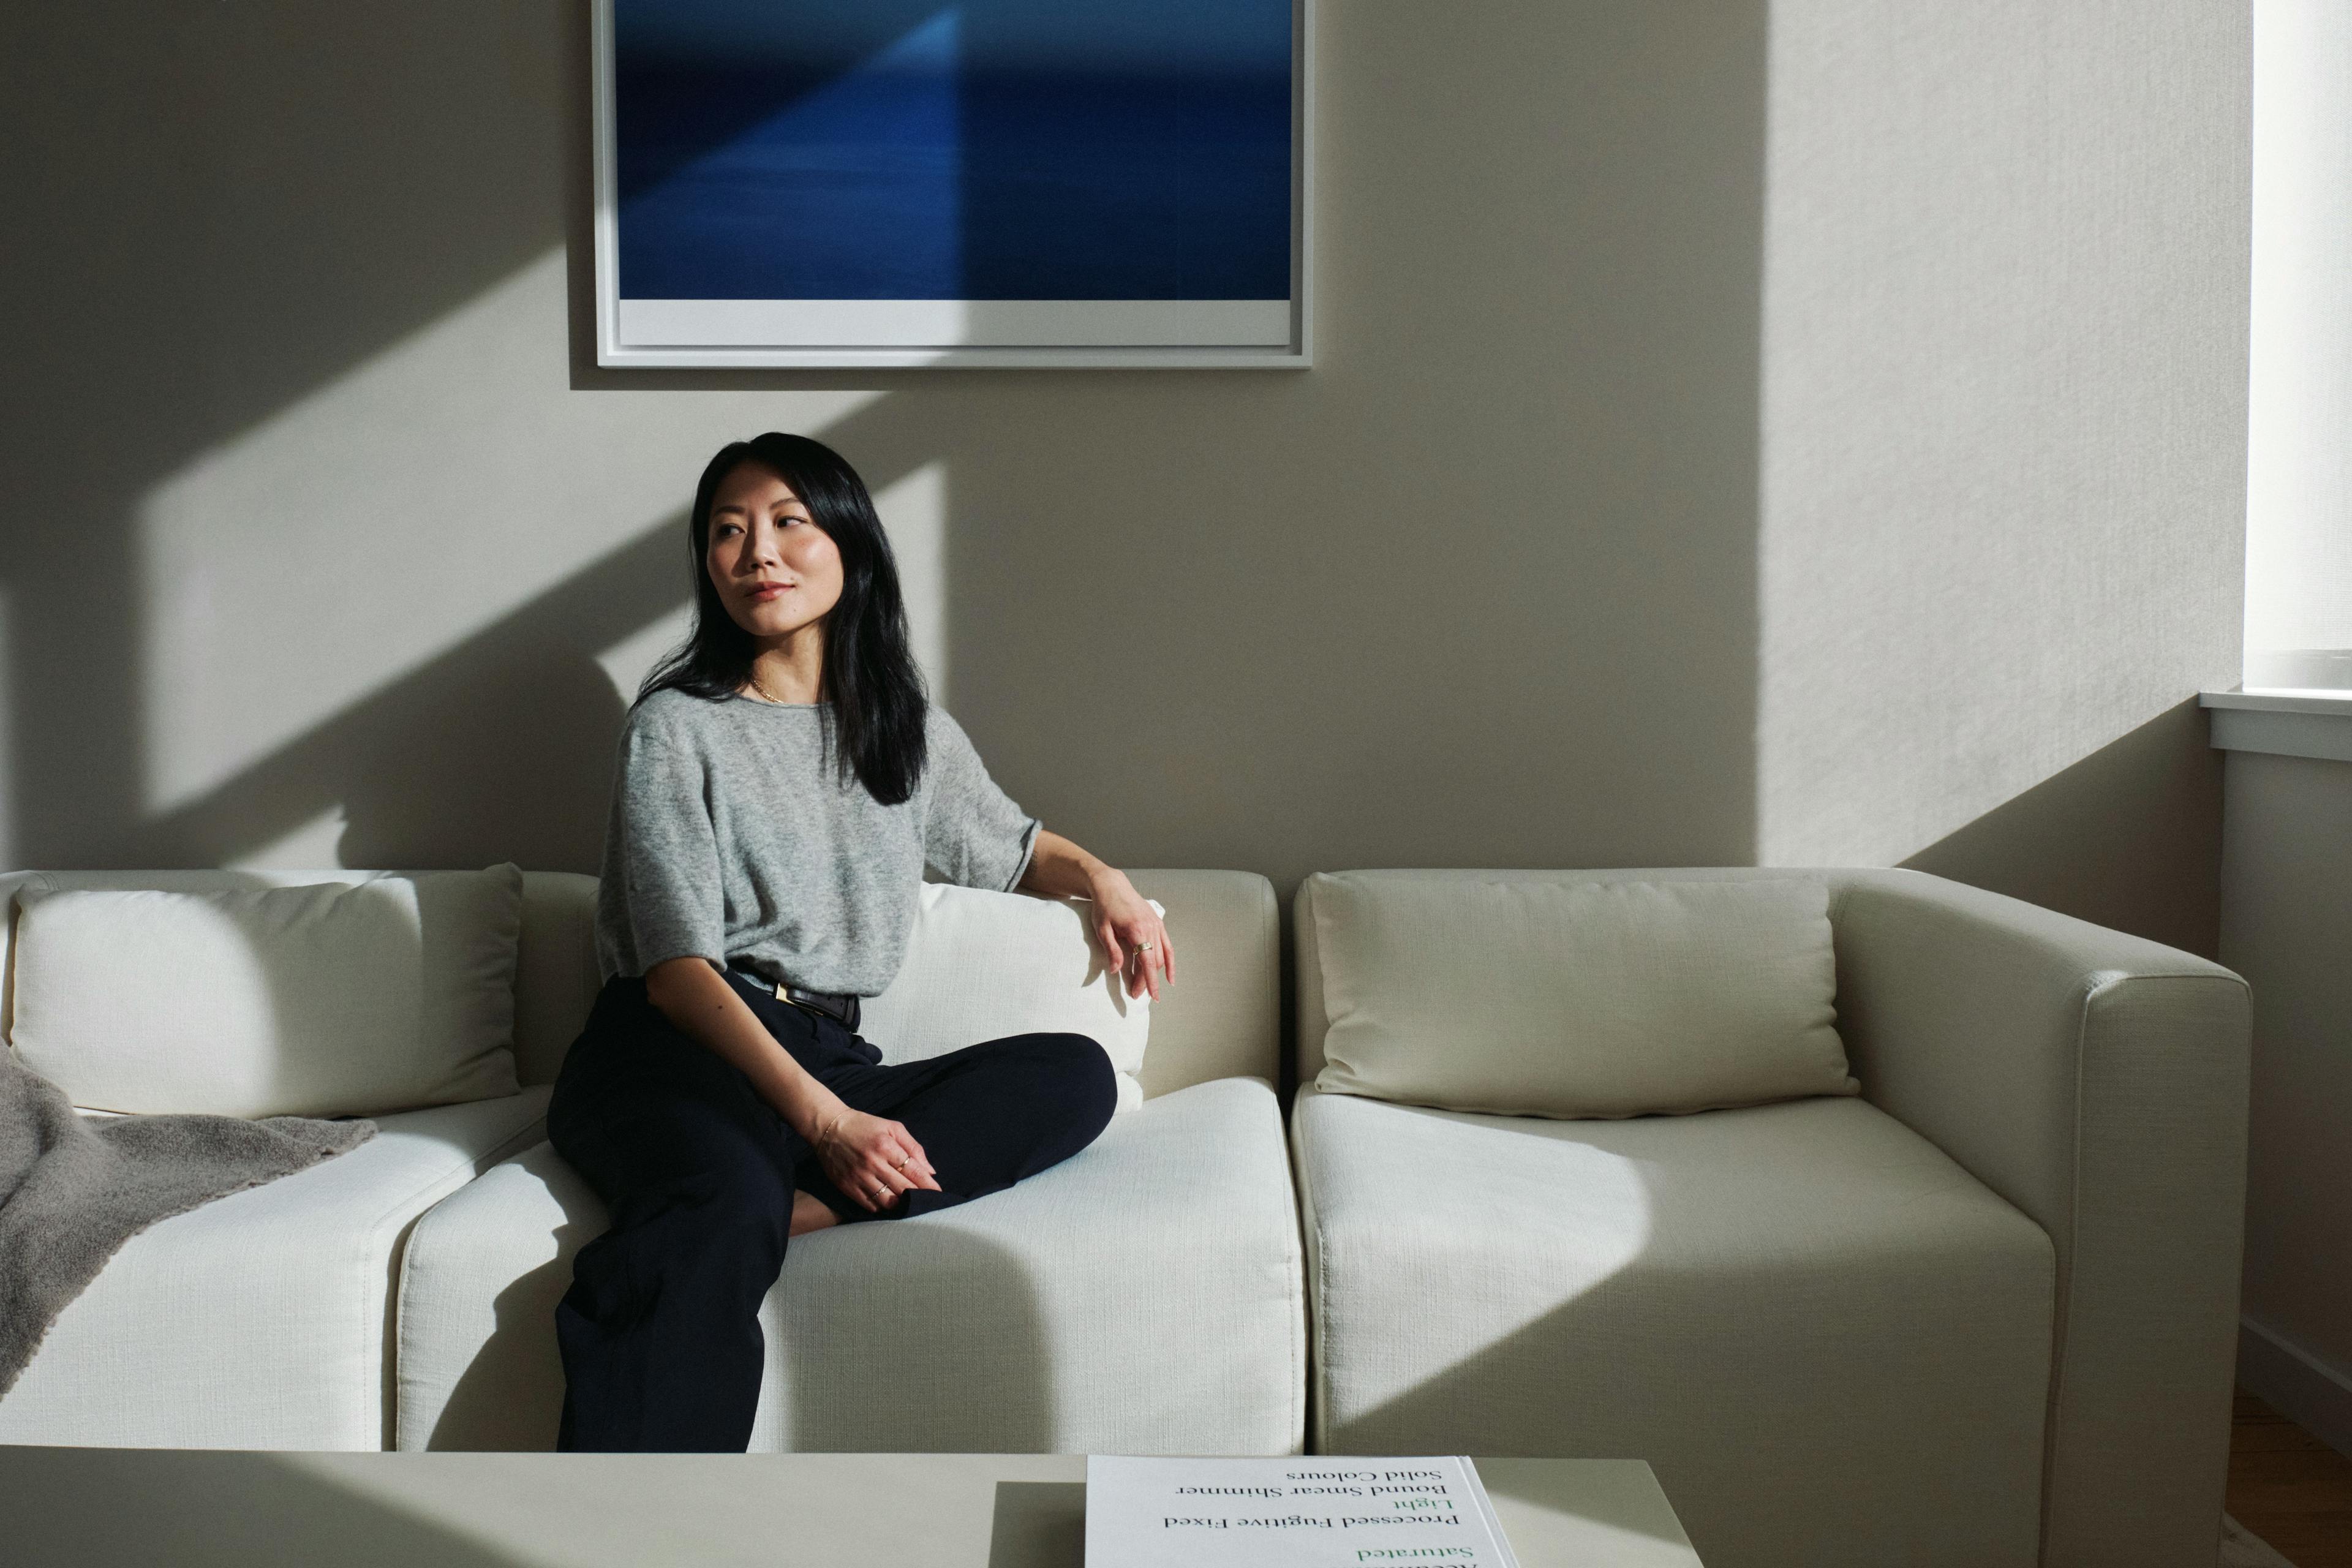 Alice Gao sitting on a white couch in her home below a blue, framed artwork.